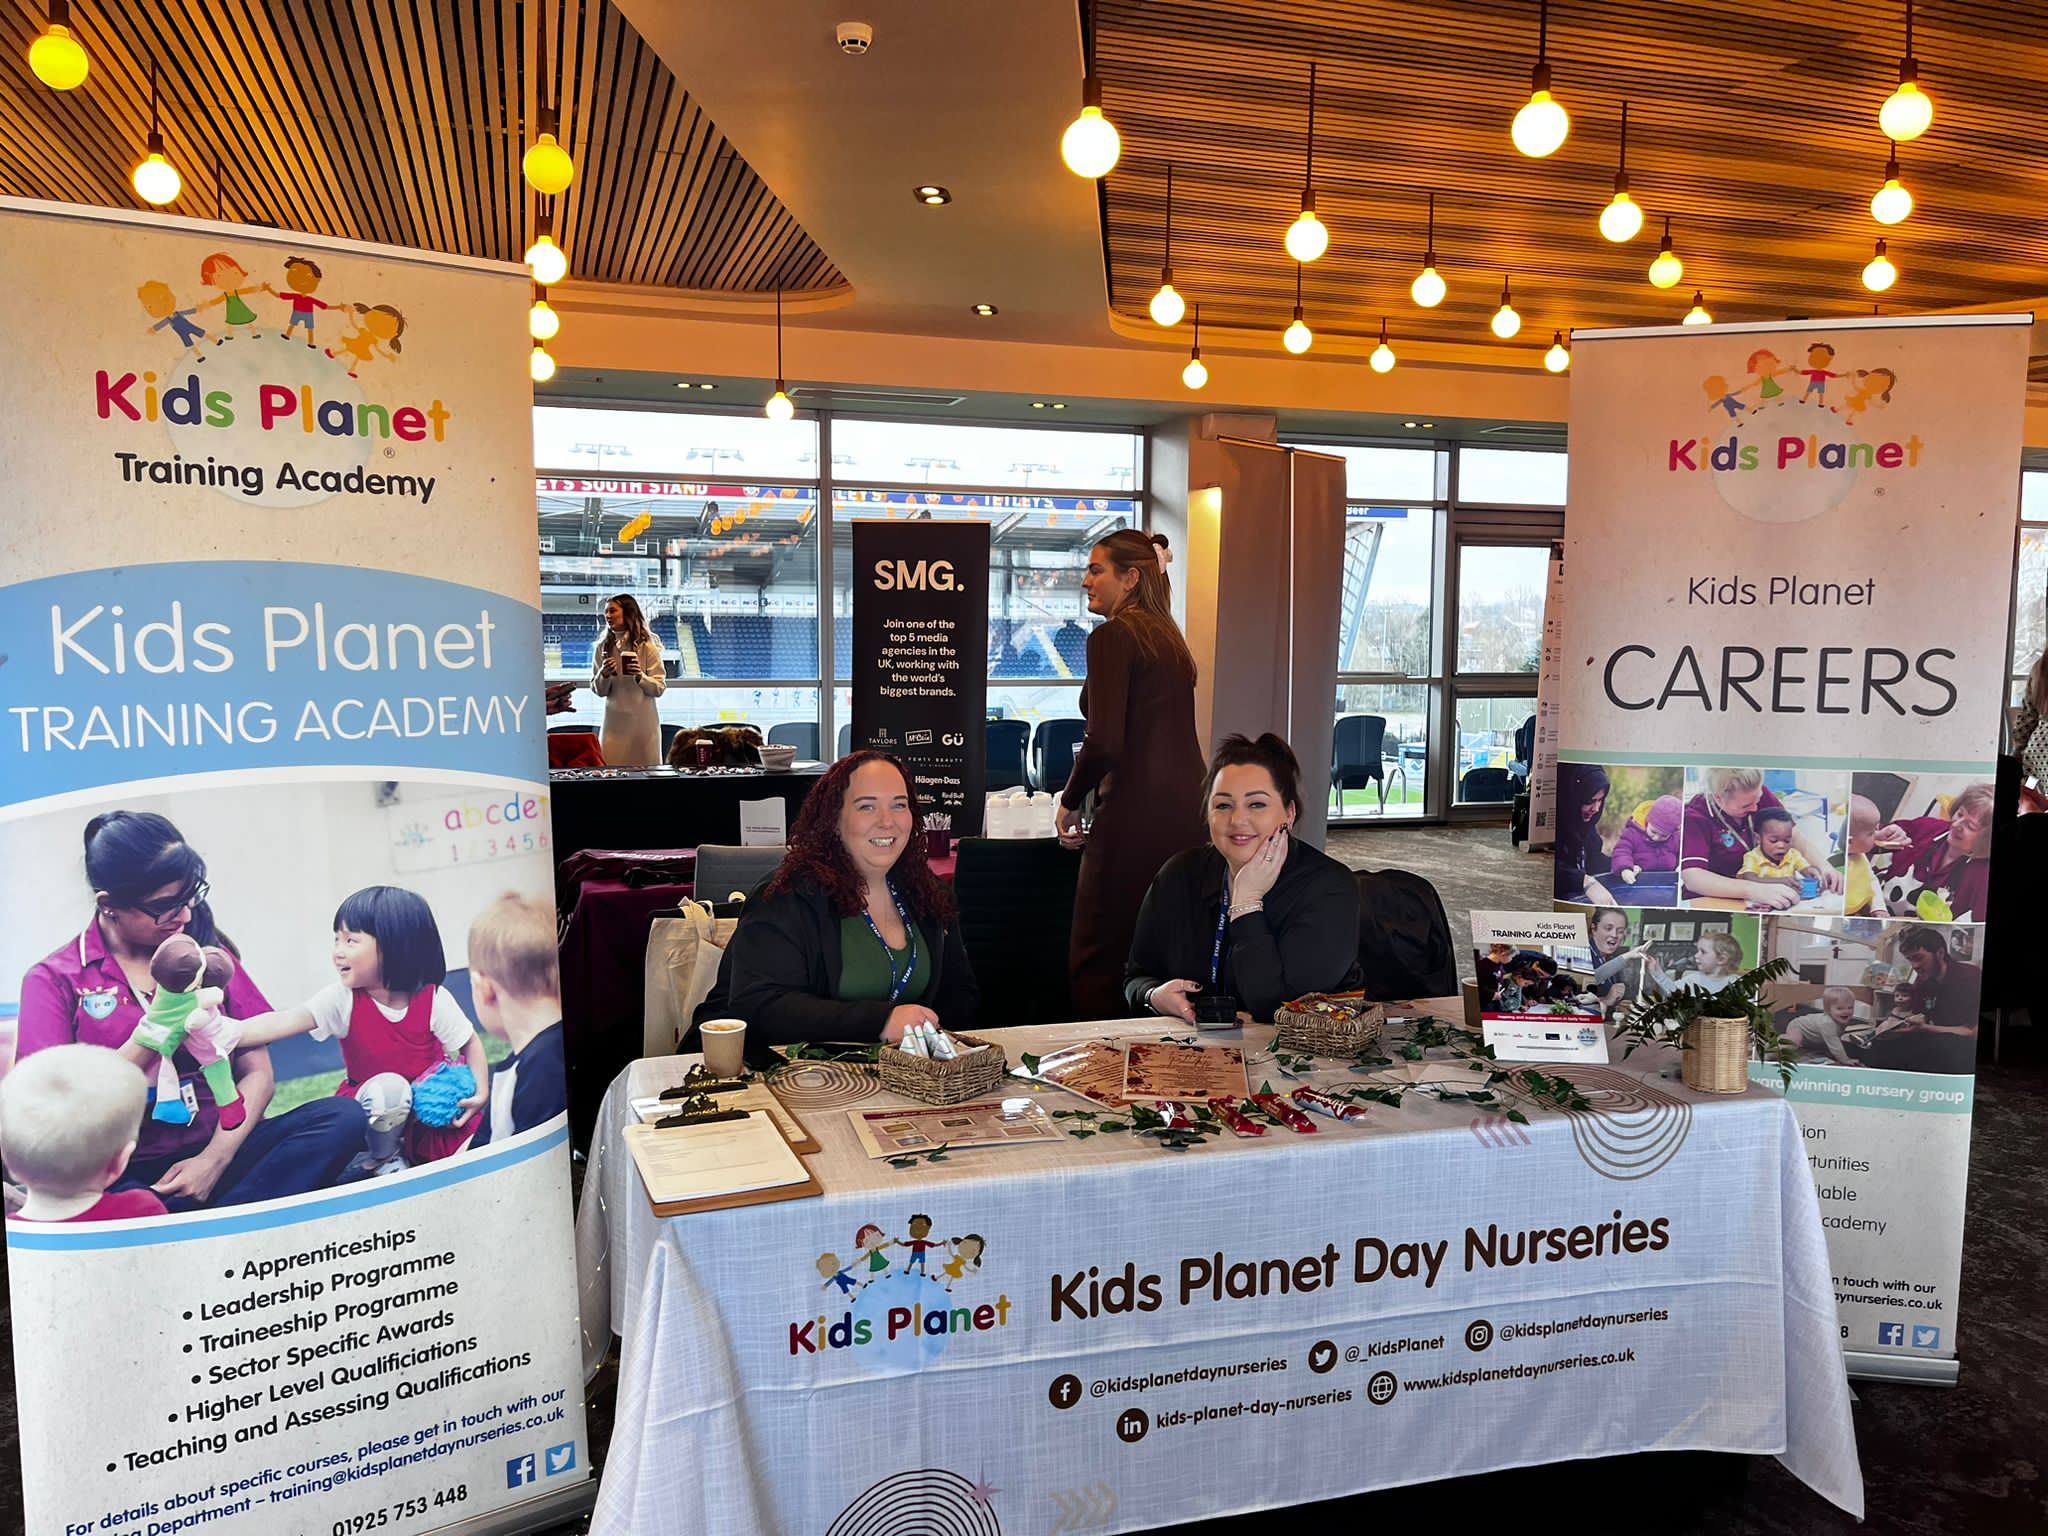 Kids Planet at our event in Leeds